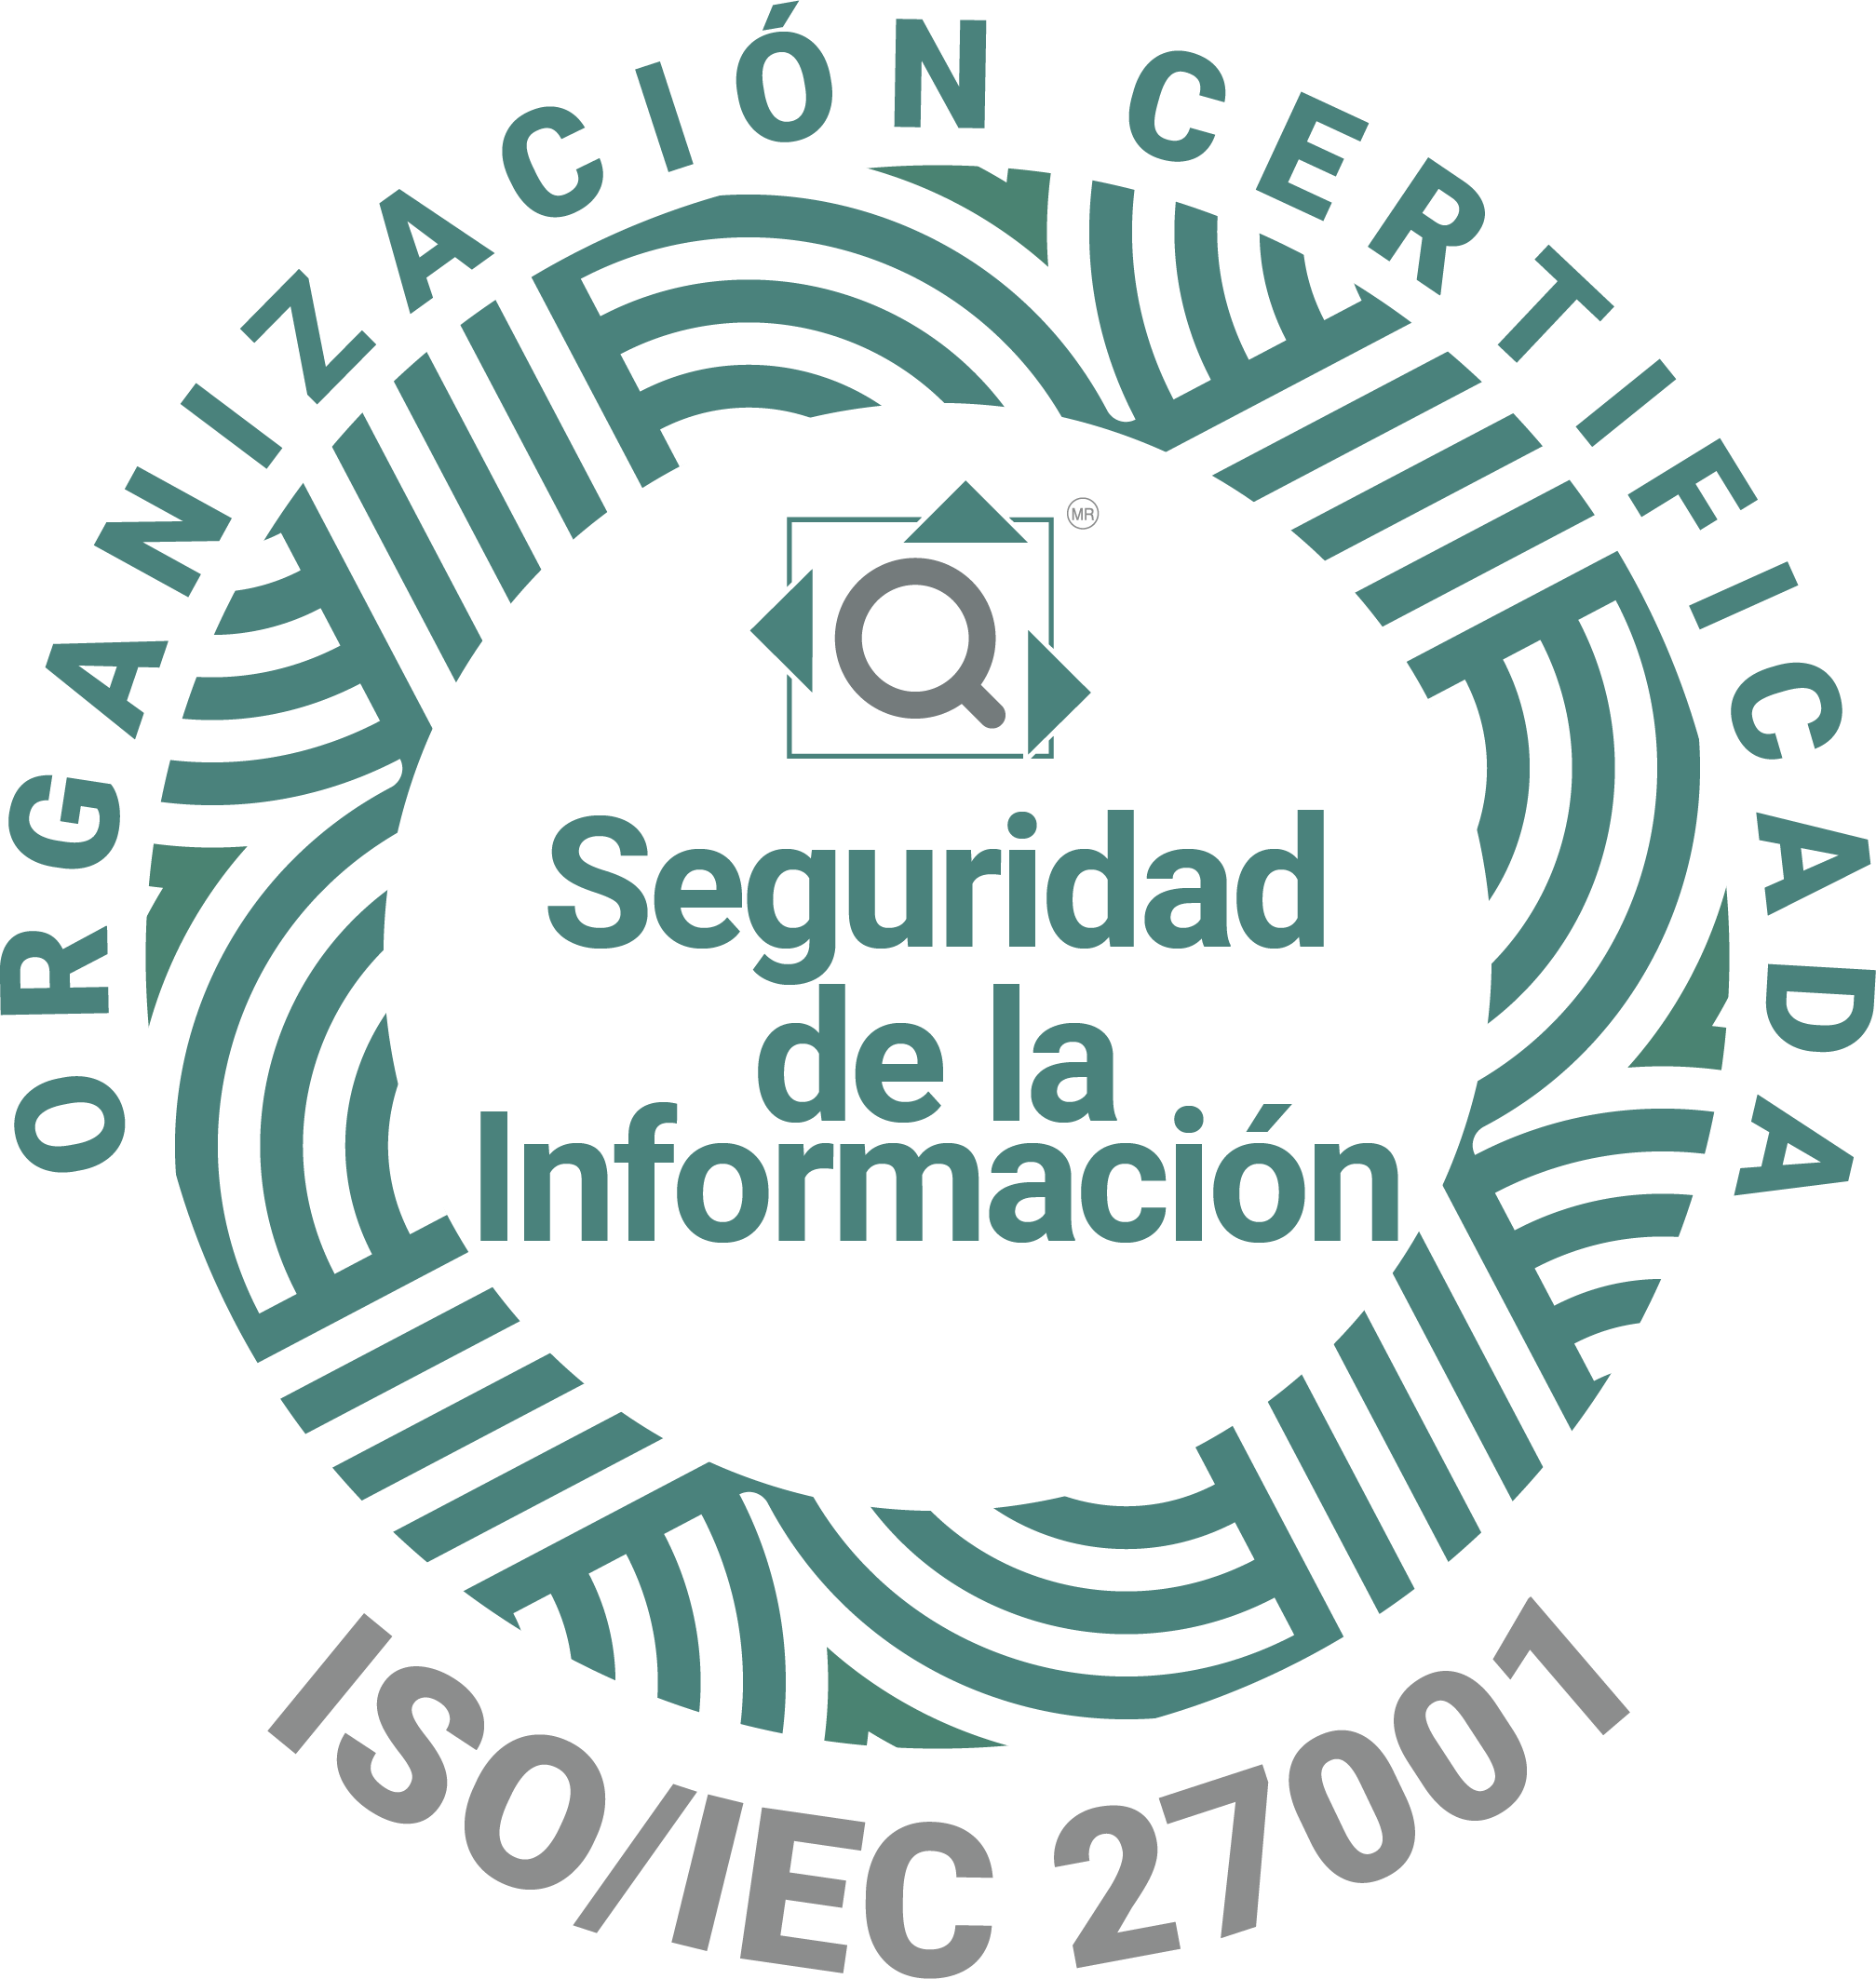 ISO 27001 